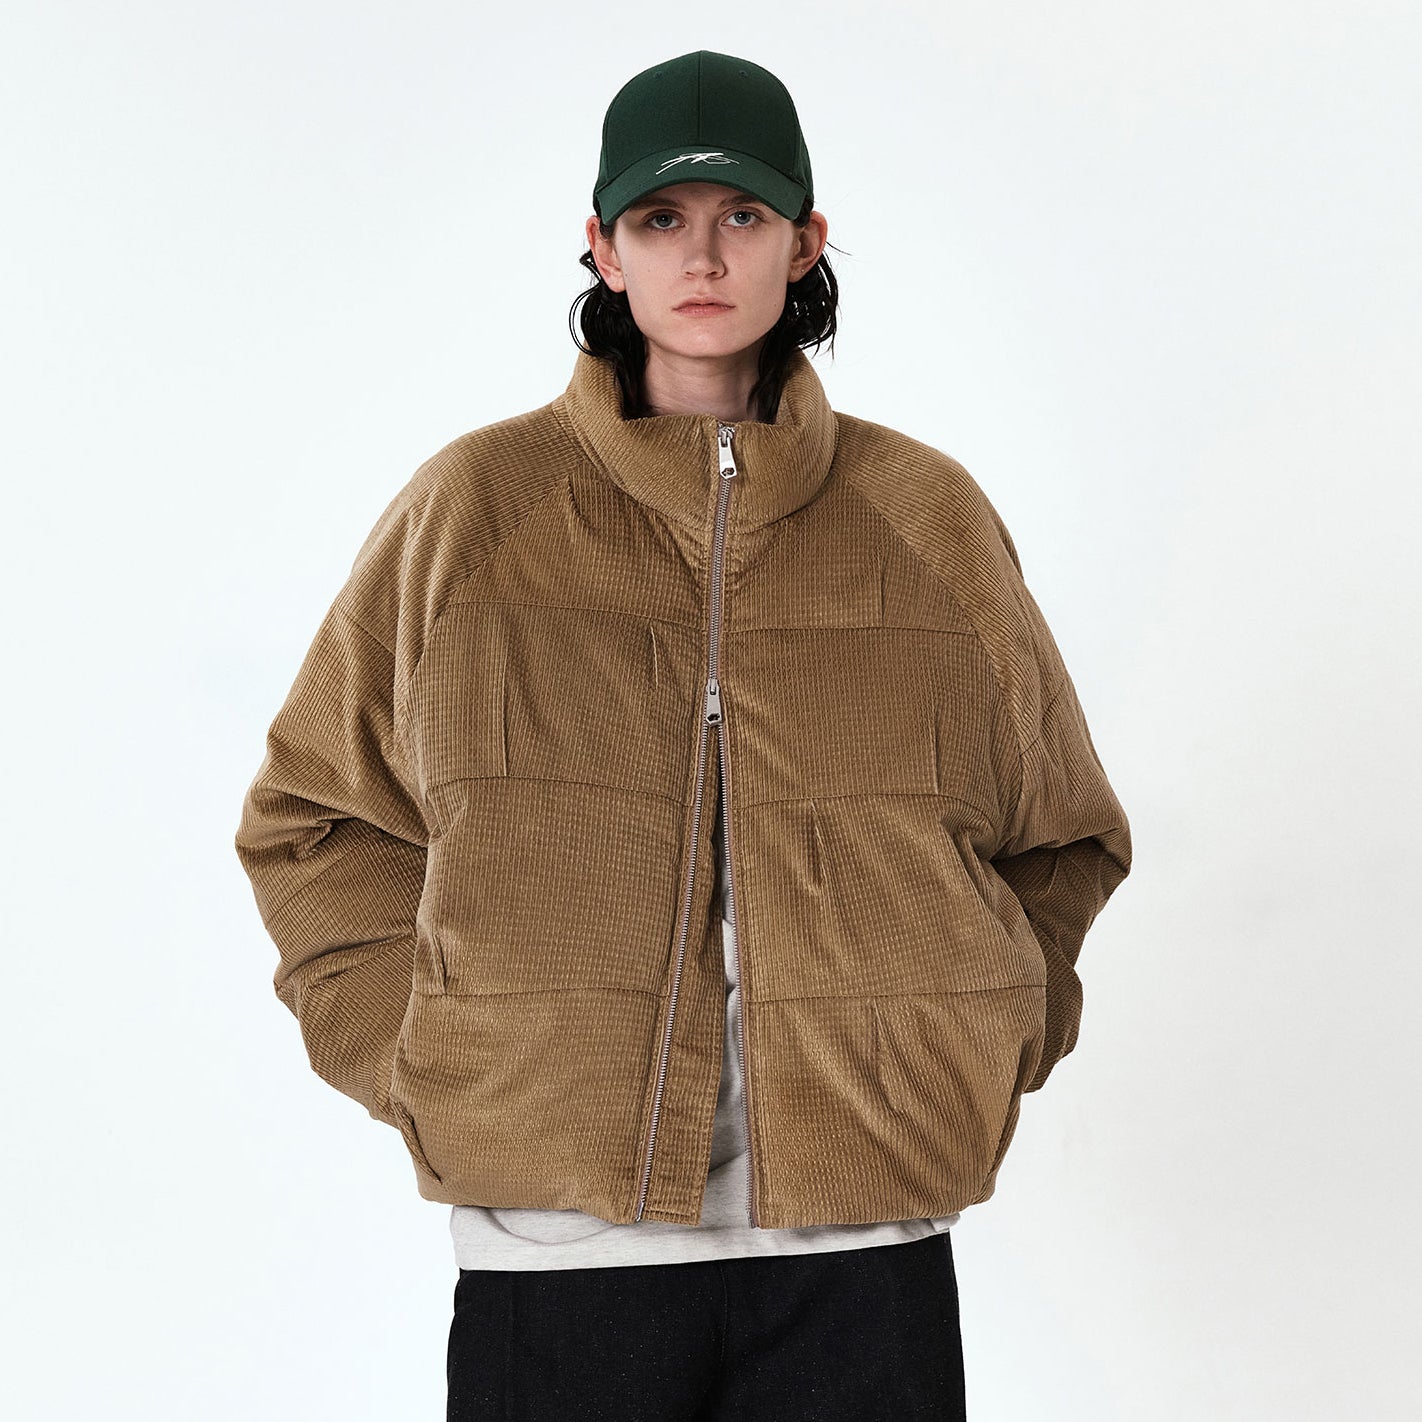 ADERERROR<br>FW23 COLLECTION